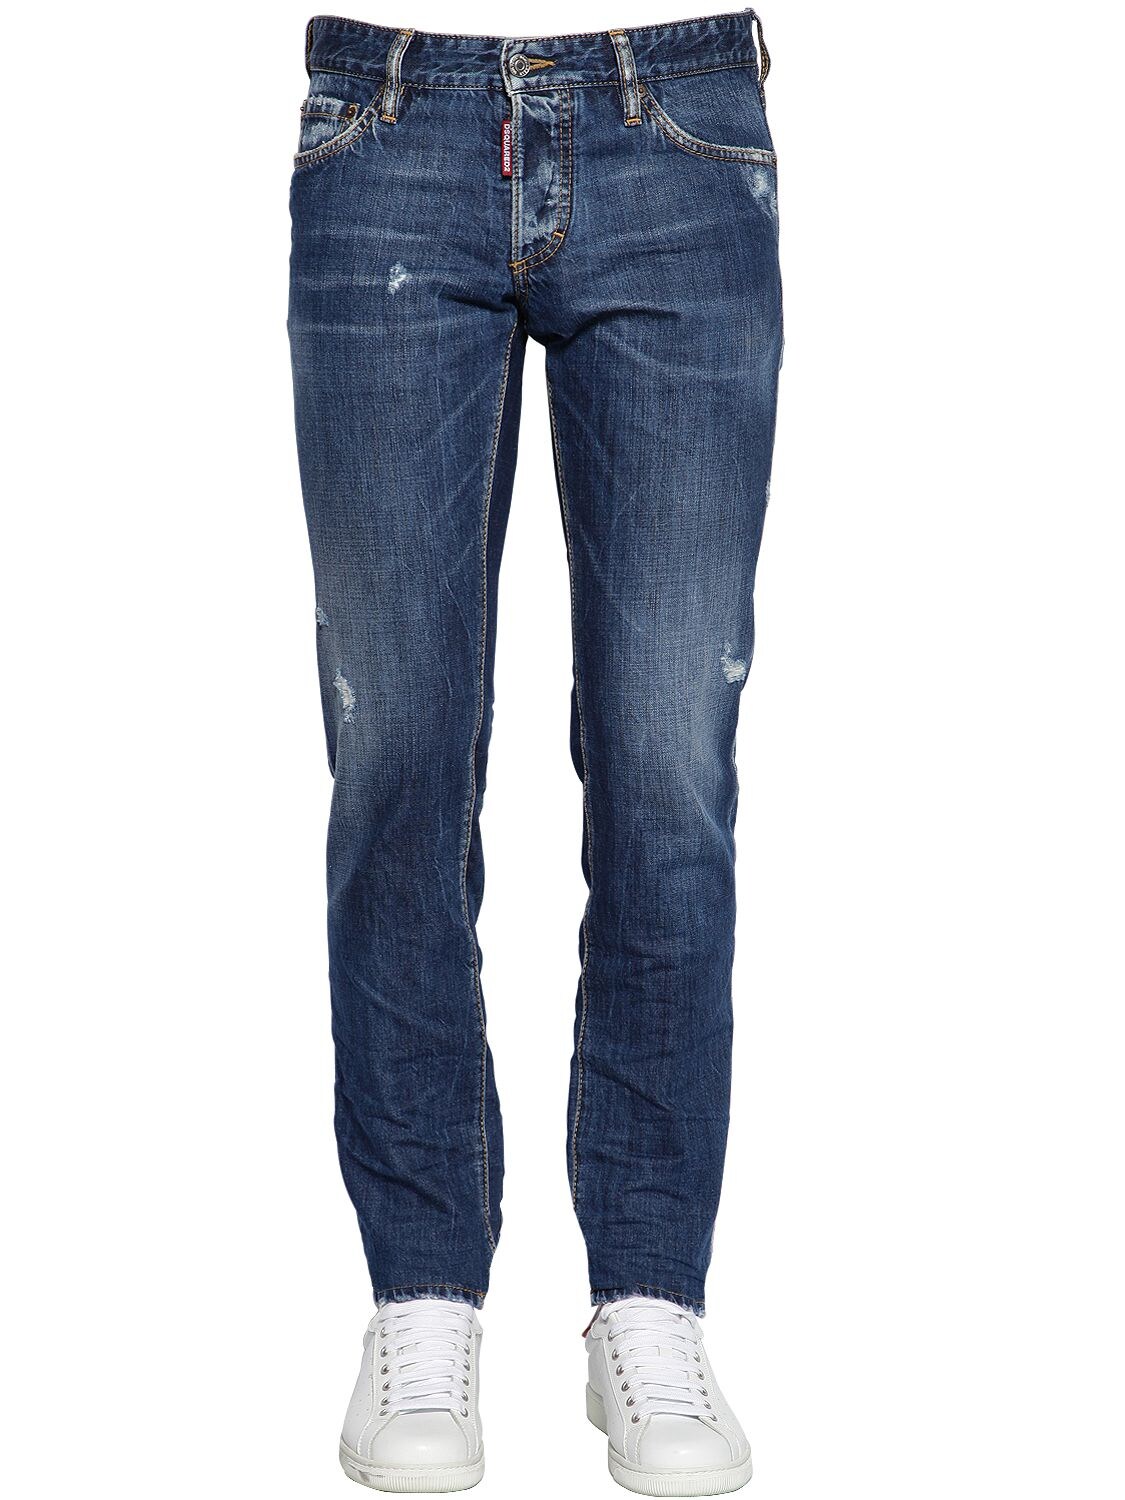 DSQUARED2 16.5CM COOL GUY DISTRESSED DENIM JEANS,67IG7E020-NDcw0